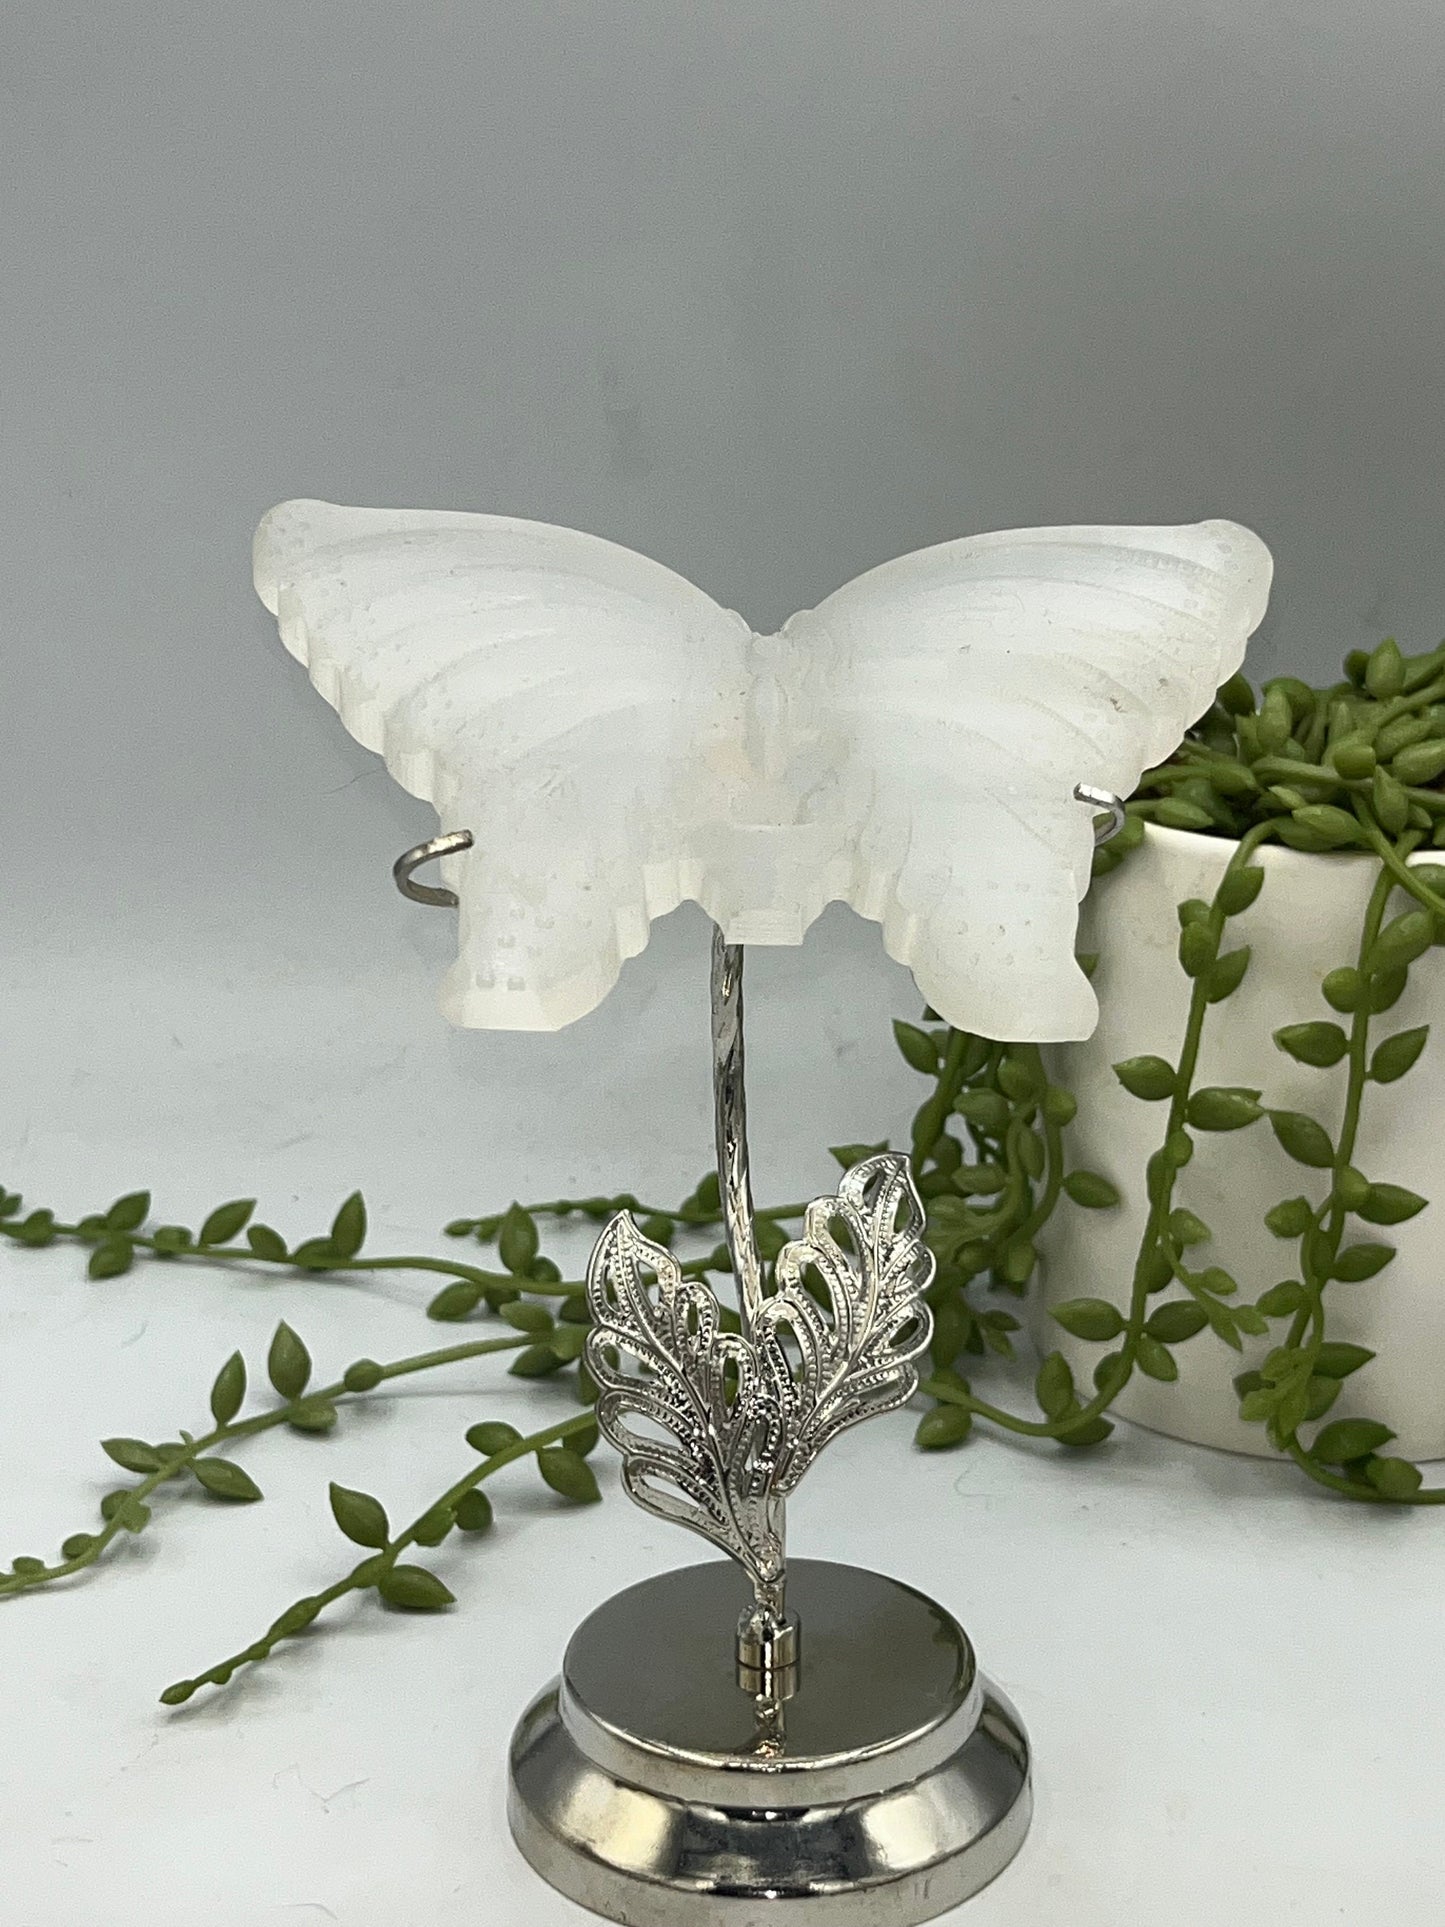 Selenite carved butterfly on stand, satin spar, gypsum, butterfly carved crystal, stand included